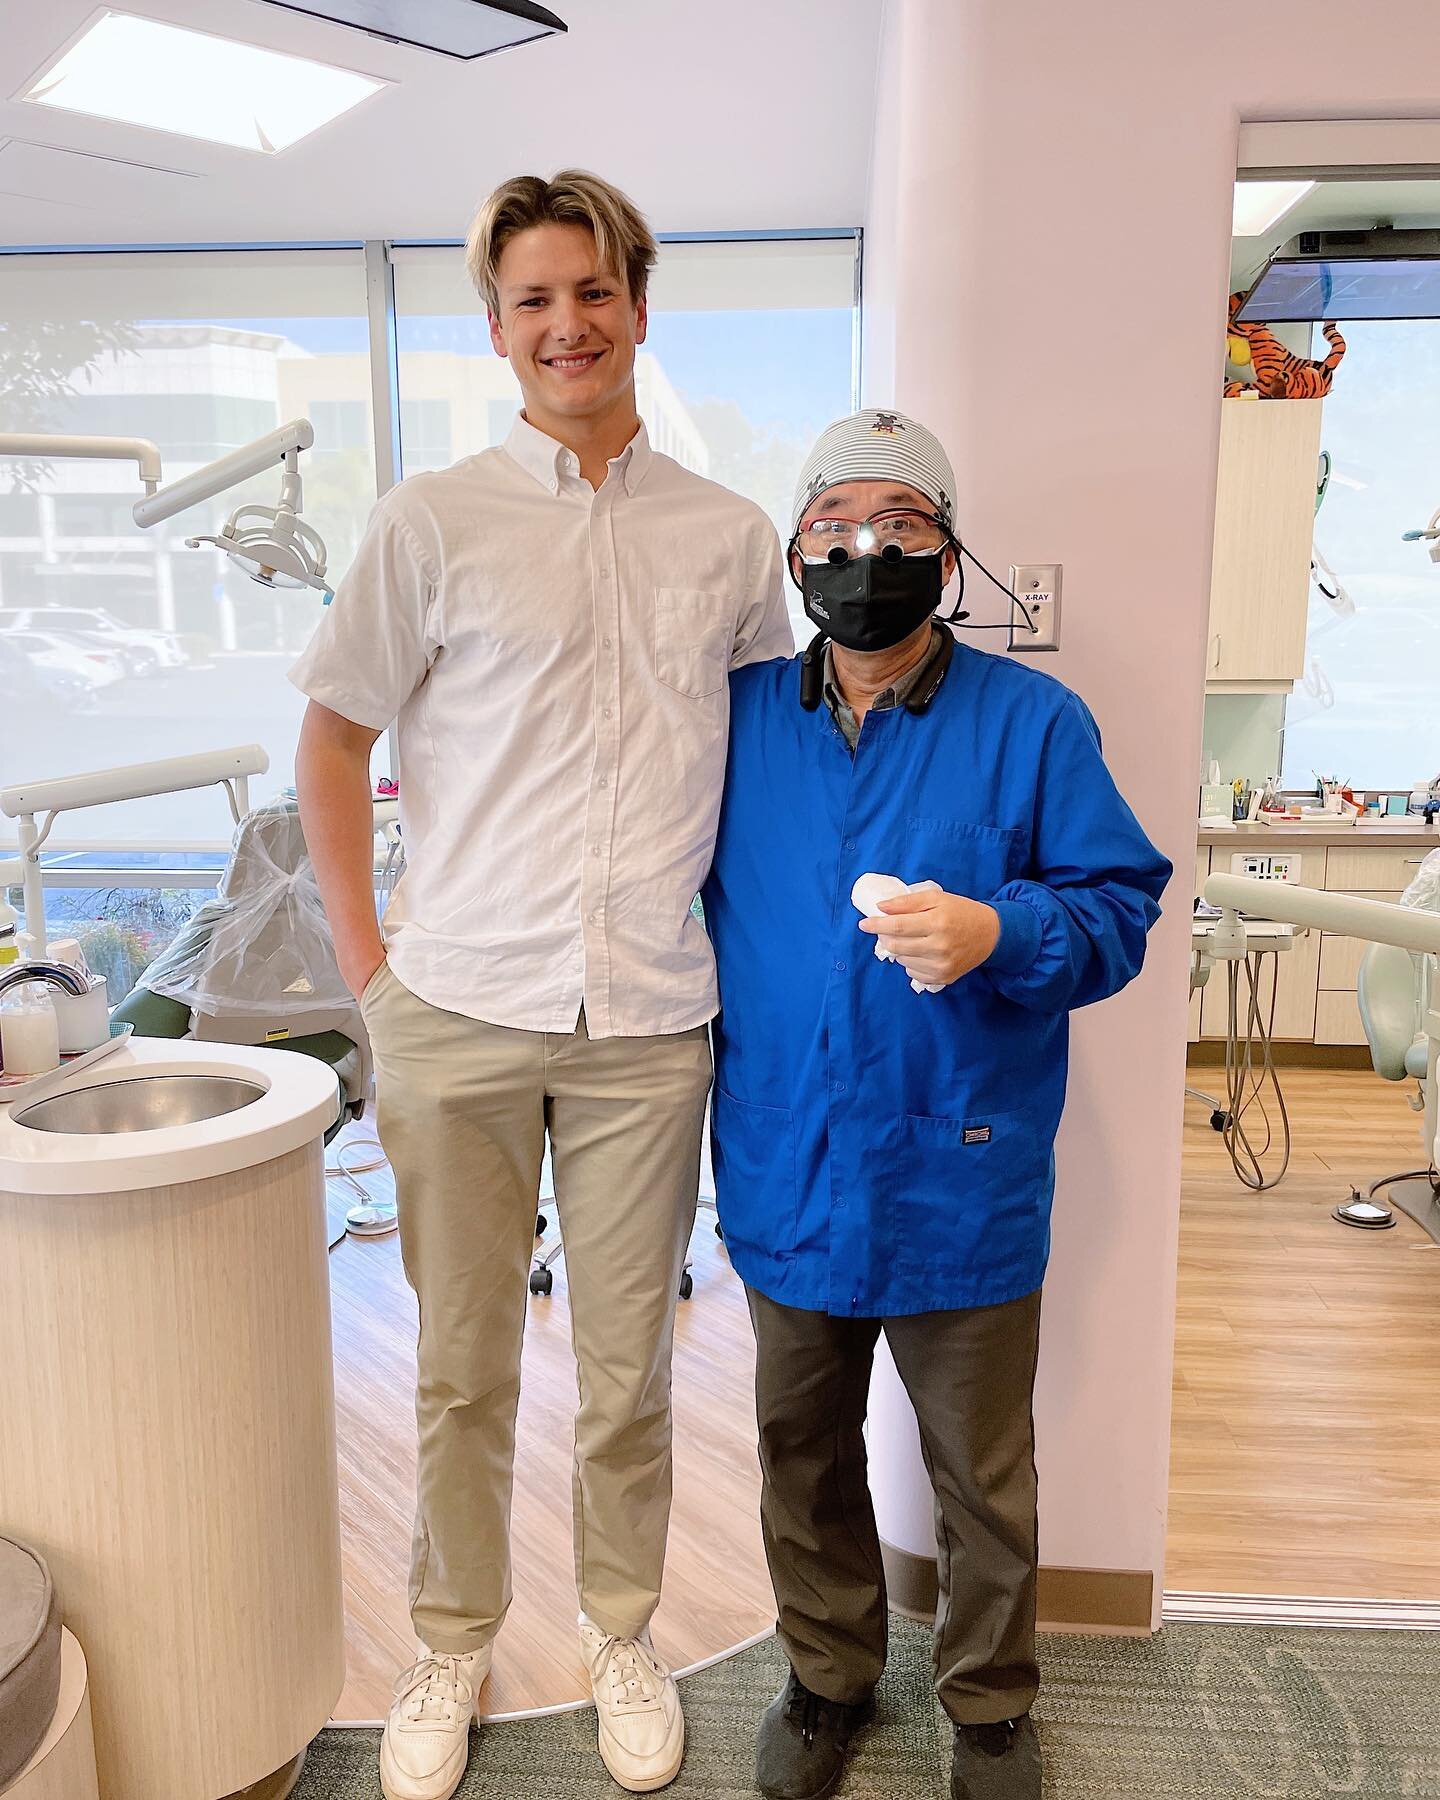 One of the many joys of being a pediatric dentist is to watch our patients grow up over the years. Dr. Lee remembers when this patient came in as a tiny toddler and couldn&rsquo;t believe how tall he is now!! We are so grateful to have our long-time 